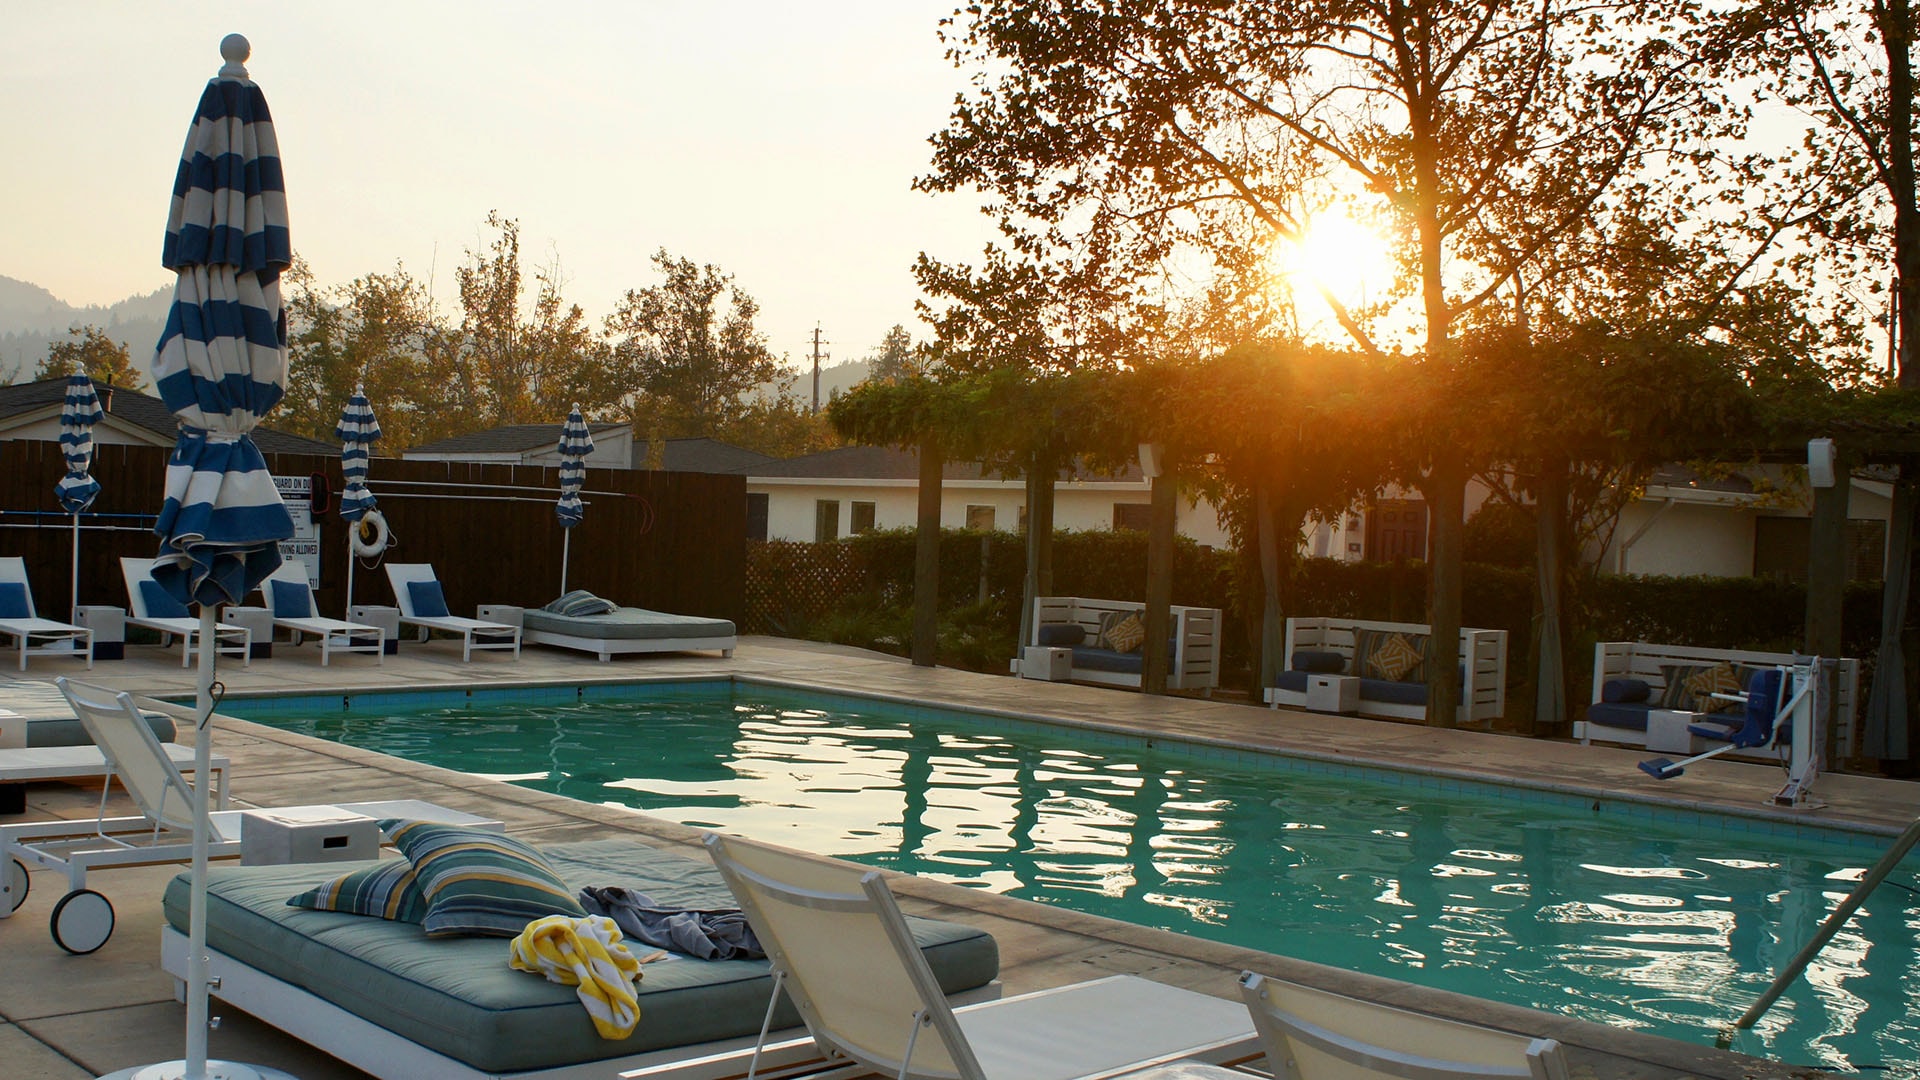 Calistoga Motor Lodge boasts three mineral springs pools and a large pool deck for relaxing.